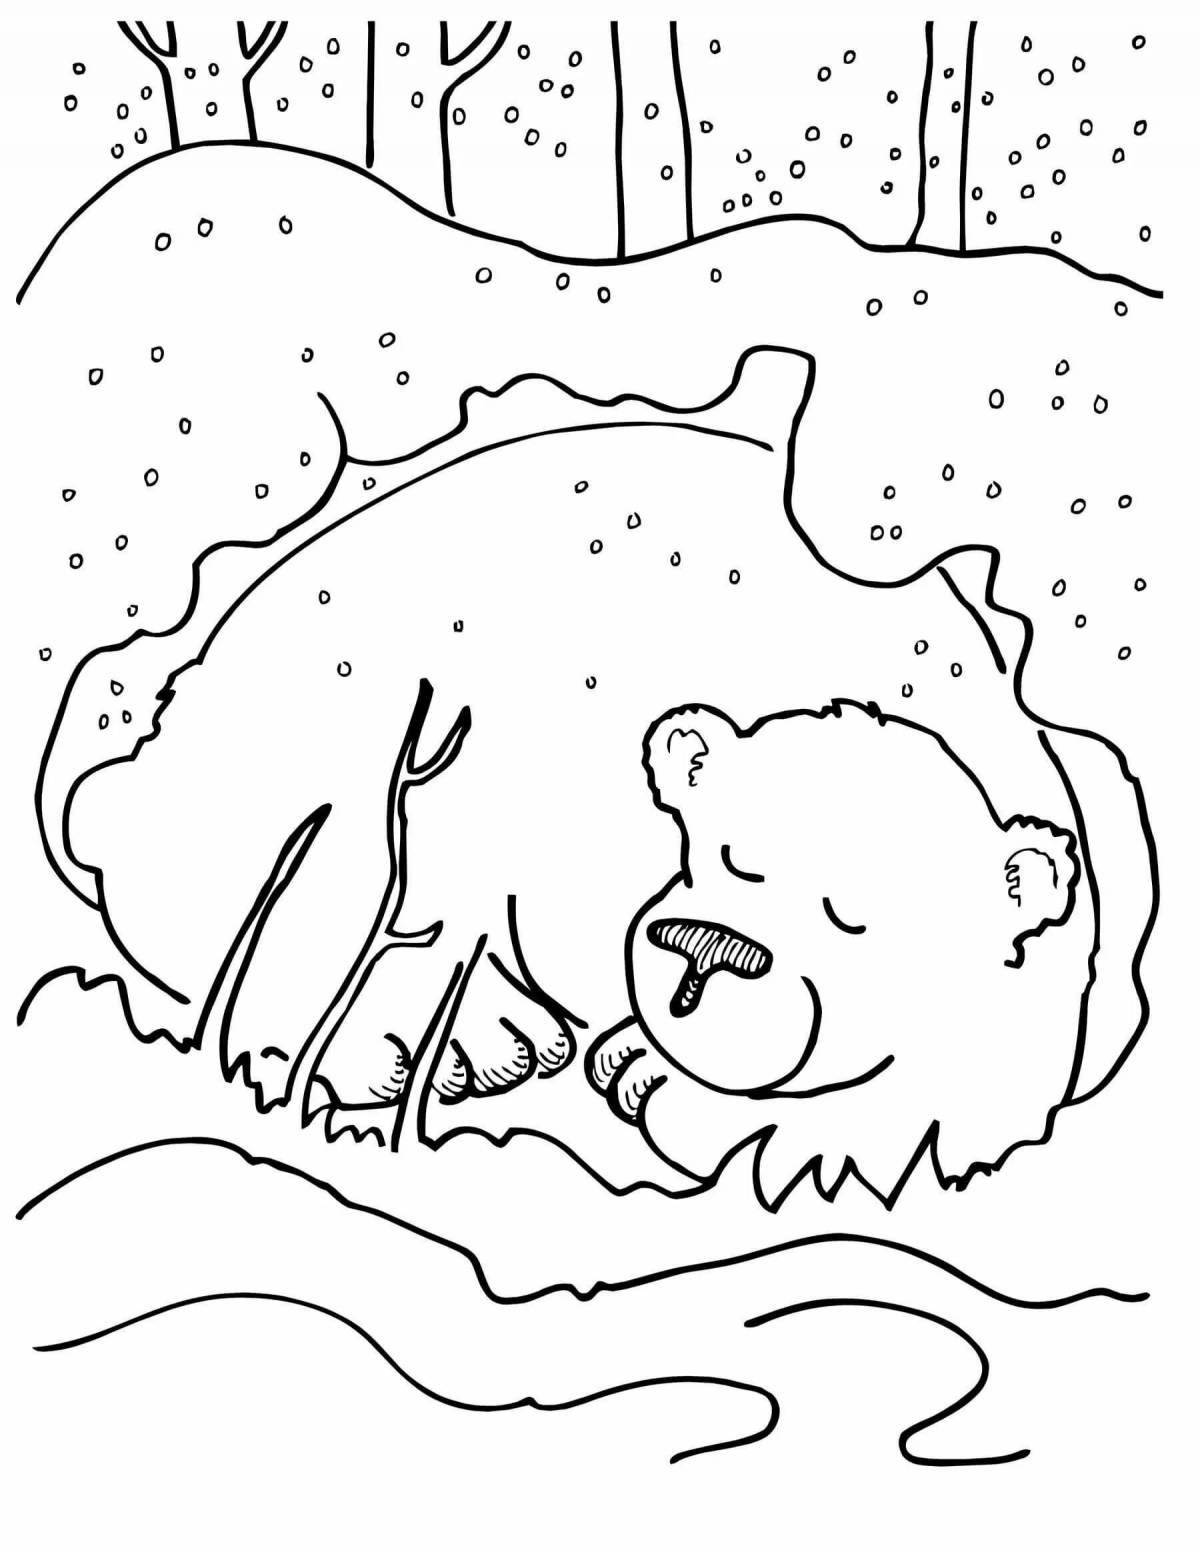 Playful coloring of wild animals in winter